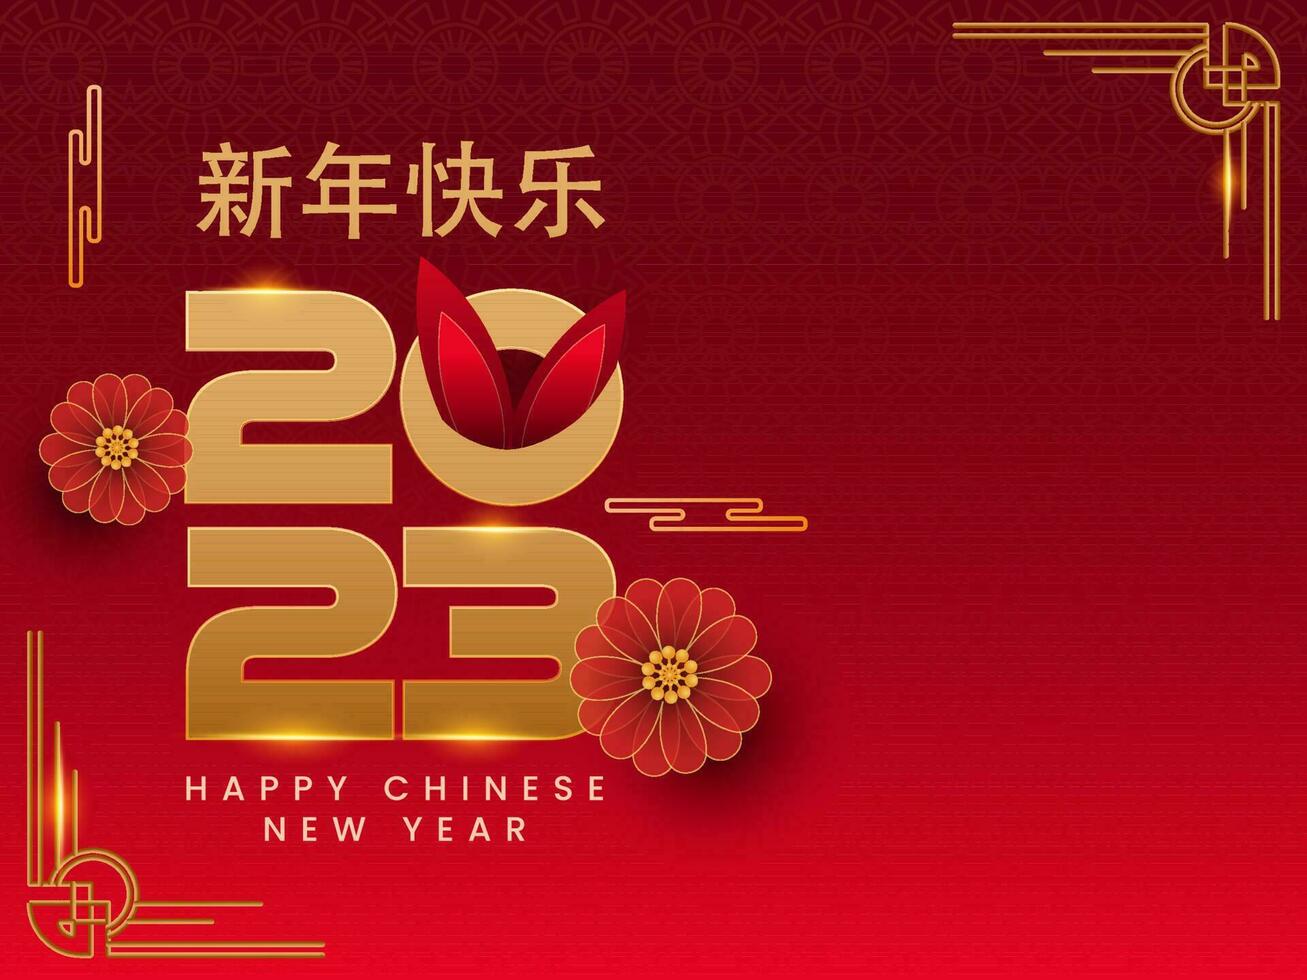 Golden 2023 Happy Chinese New Year Mandarin Text With Rabbit Ears, Paper Flowers On Red Traditional Pattern Background. vector